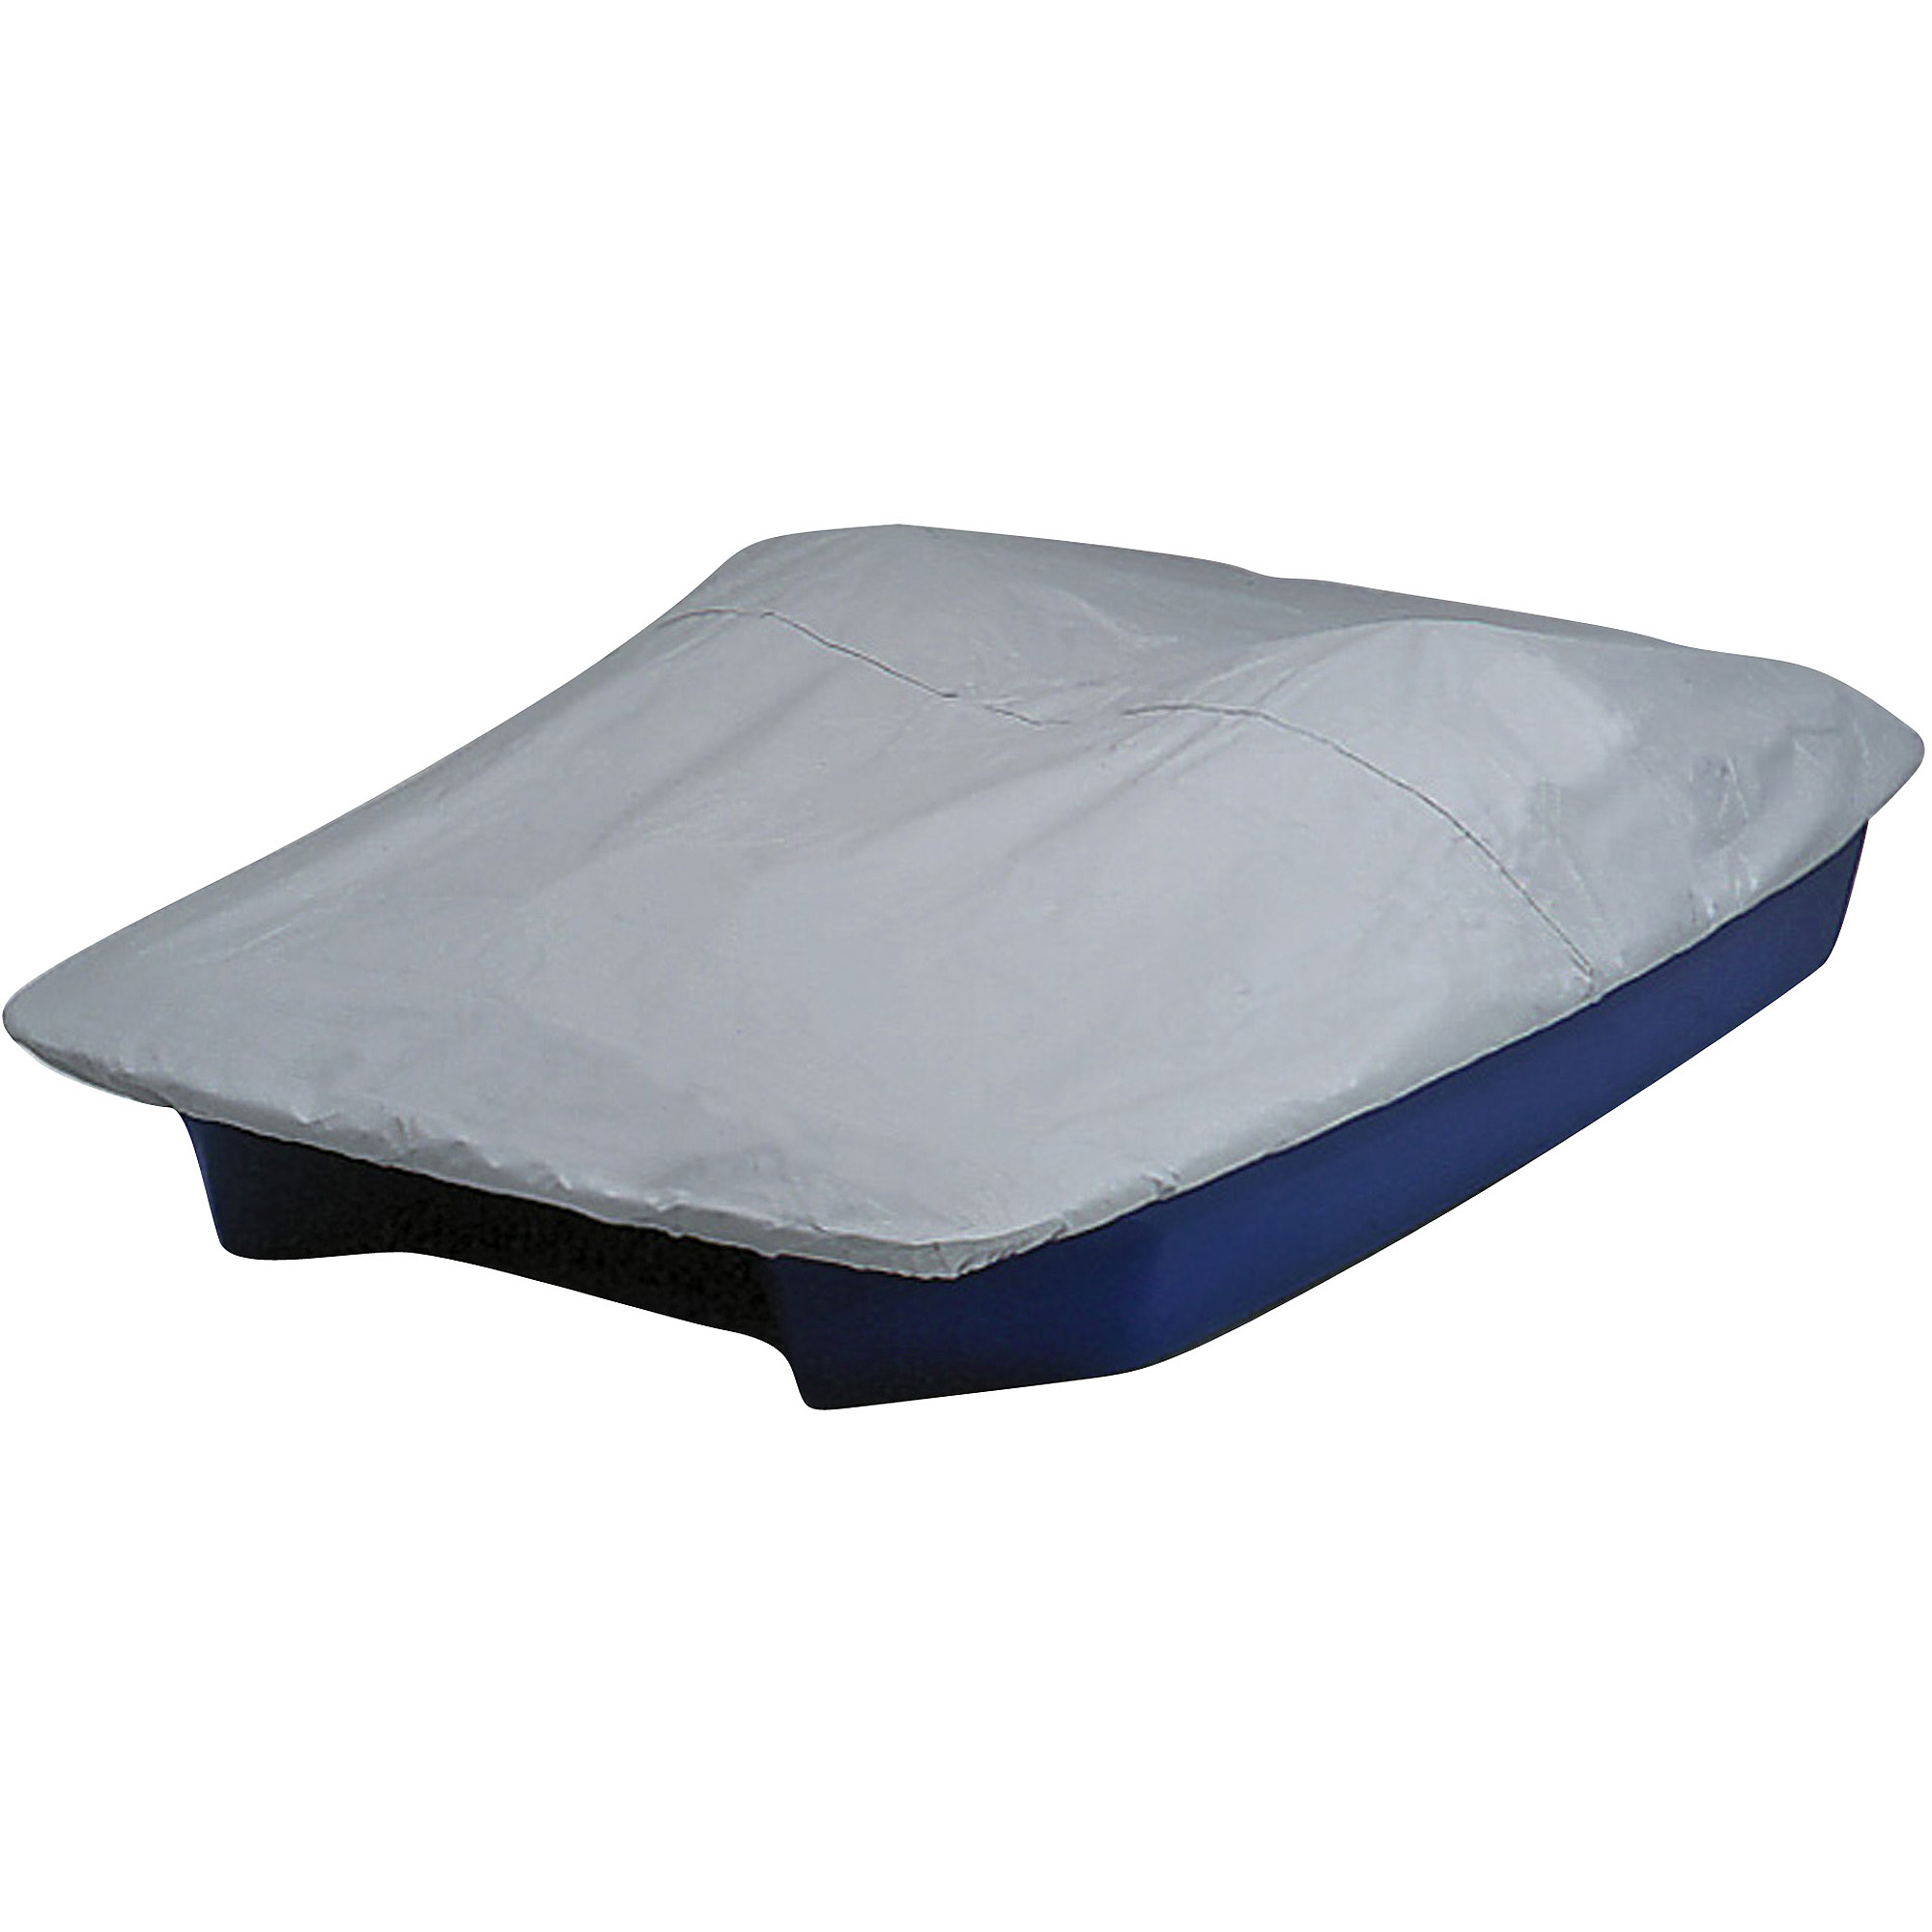 Sun Dolphin 3-Seat Pedal Boat Mooring Cover, Gray - image 1 of 1